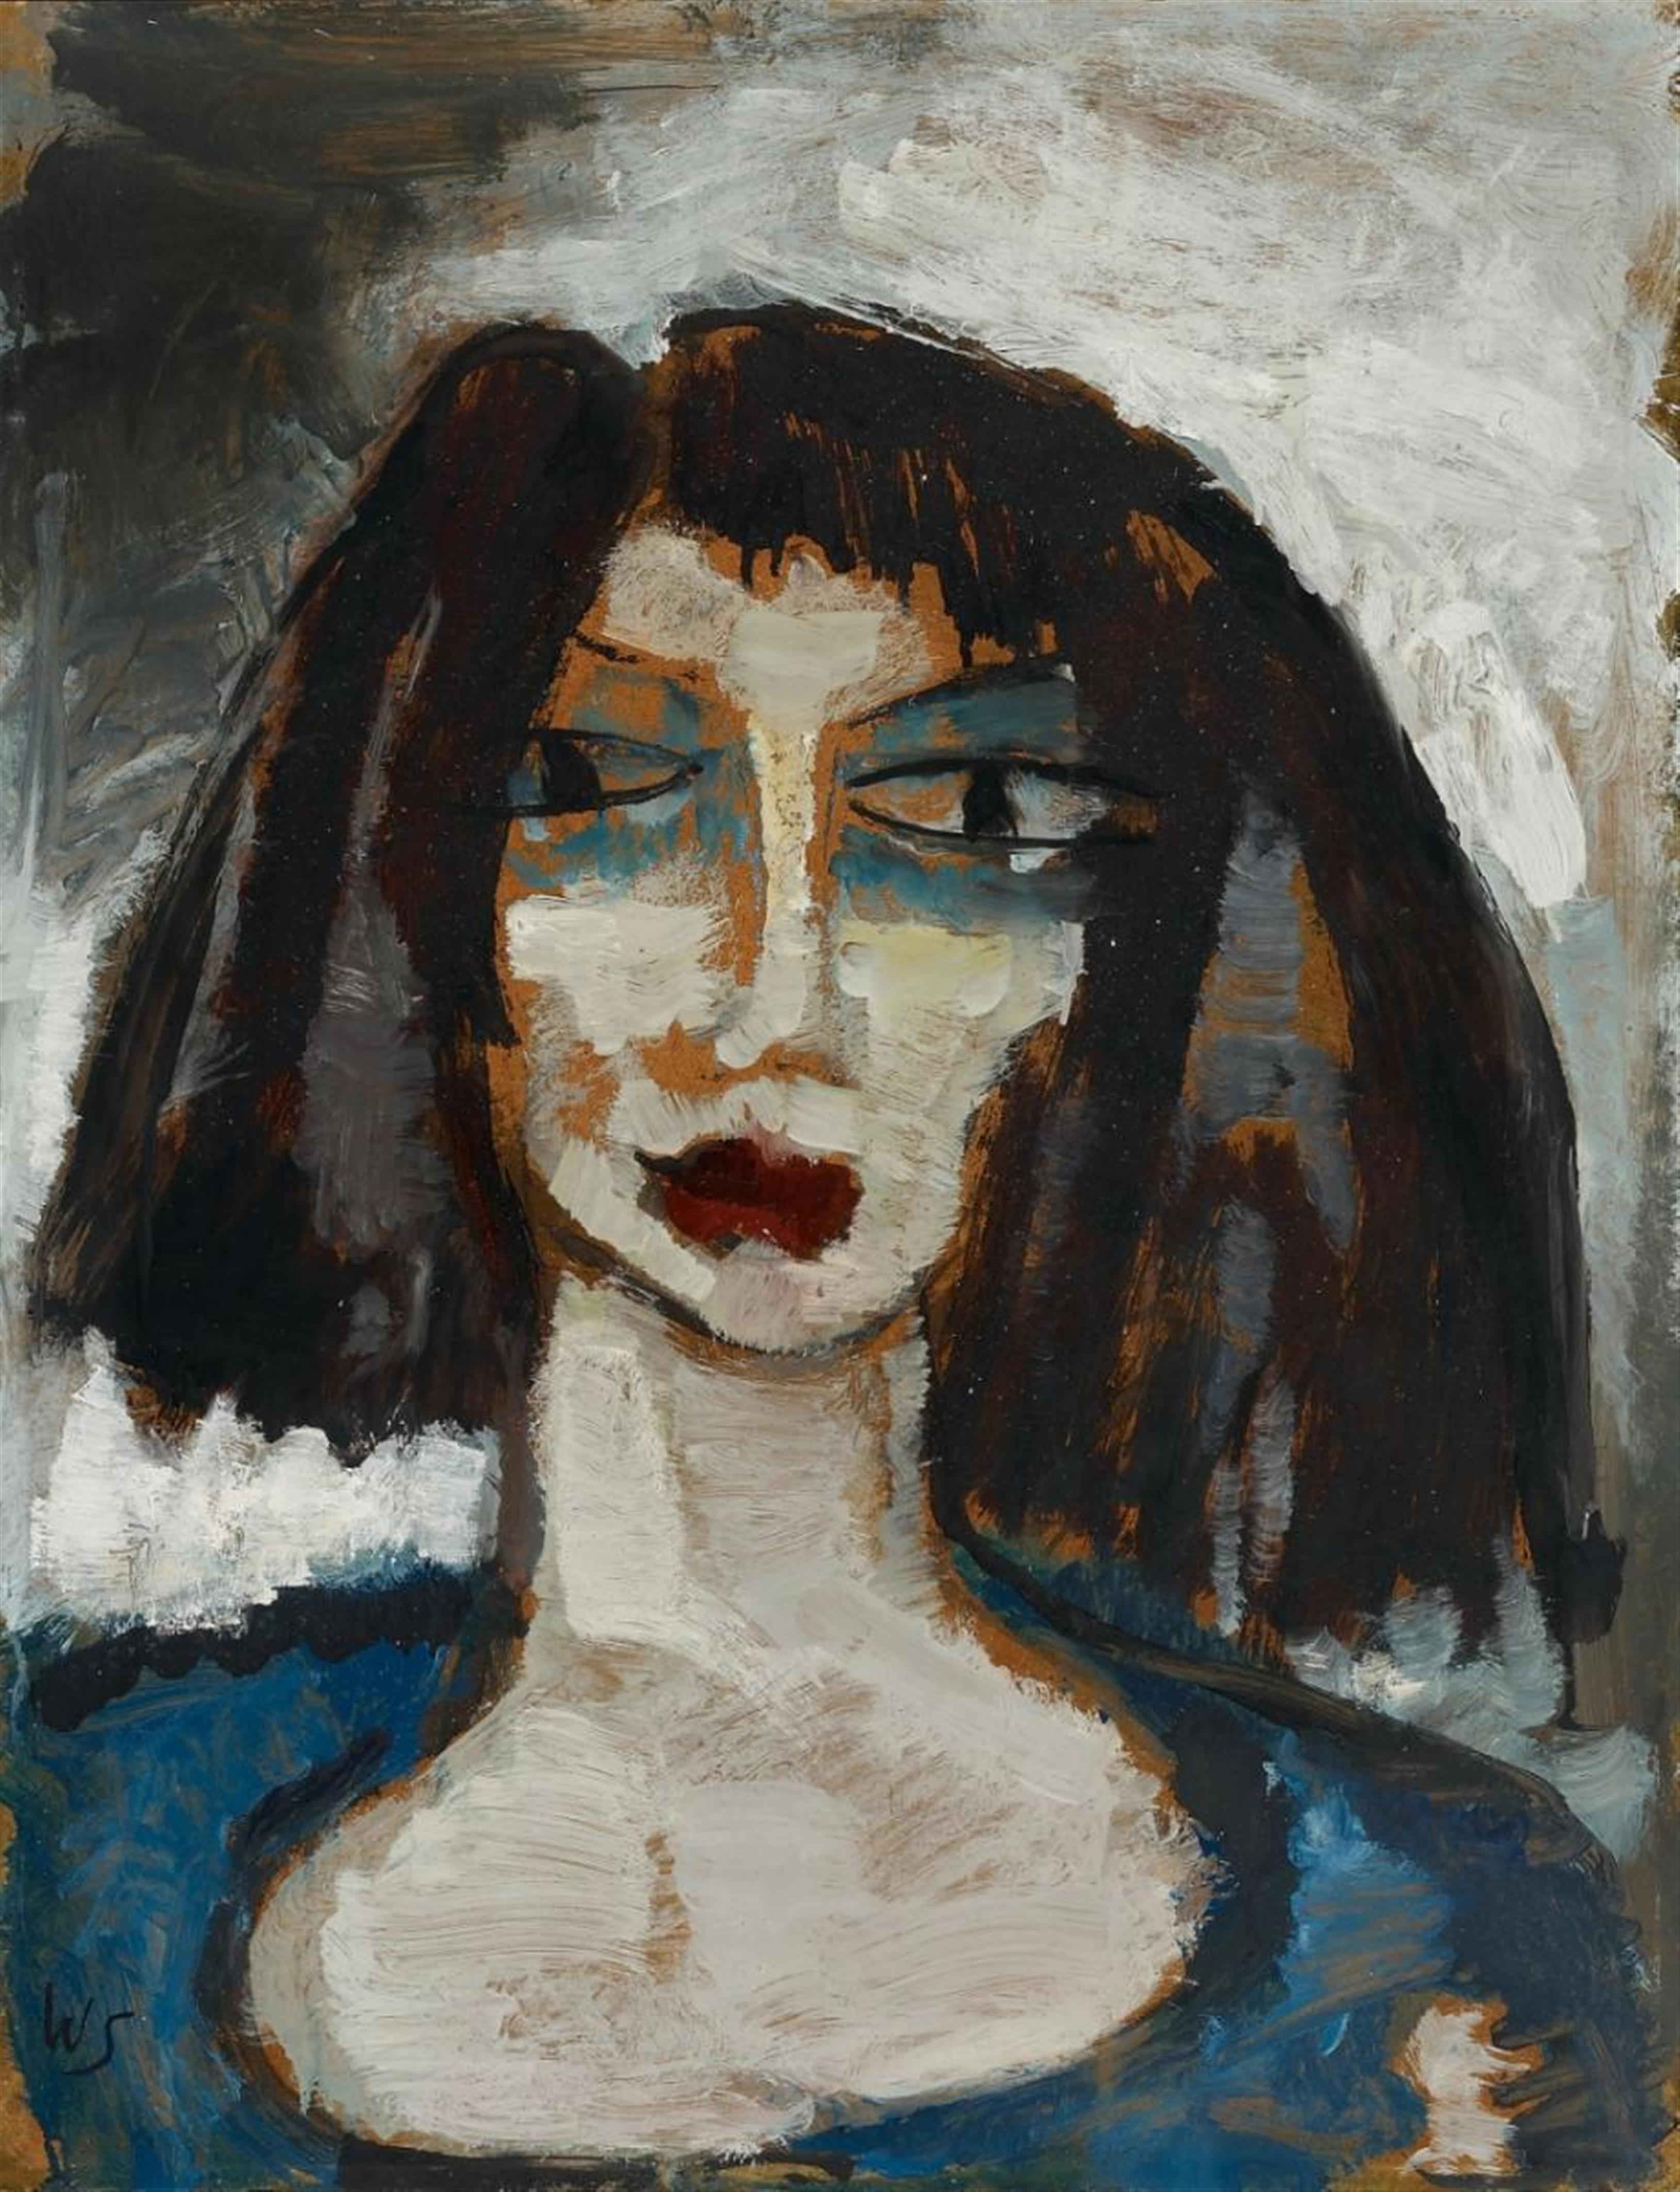 Werner Scholz - Florentinerin (Young woman from Florence) - image-1